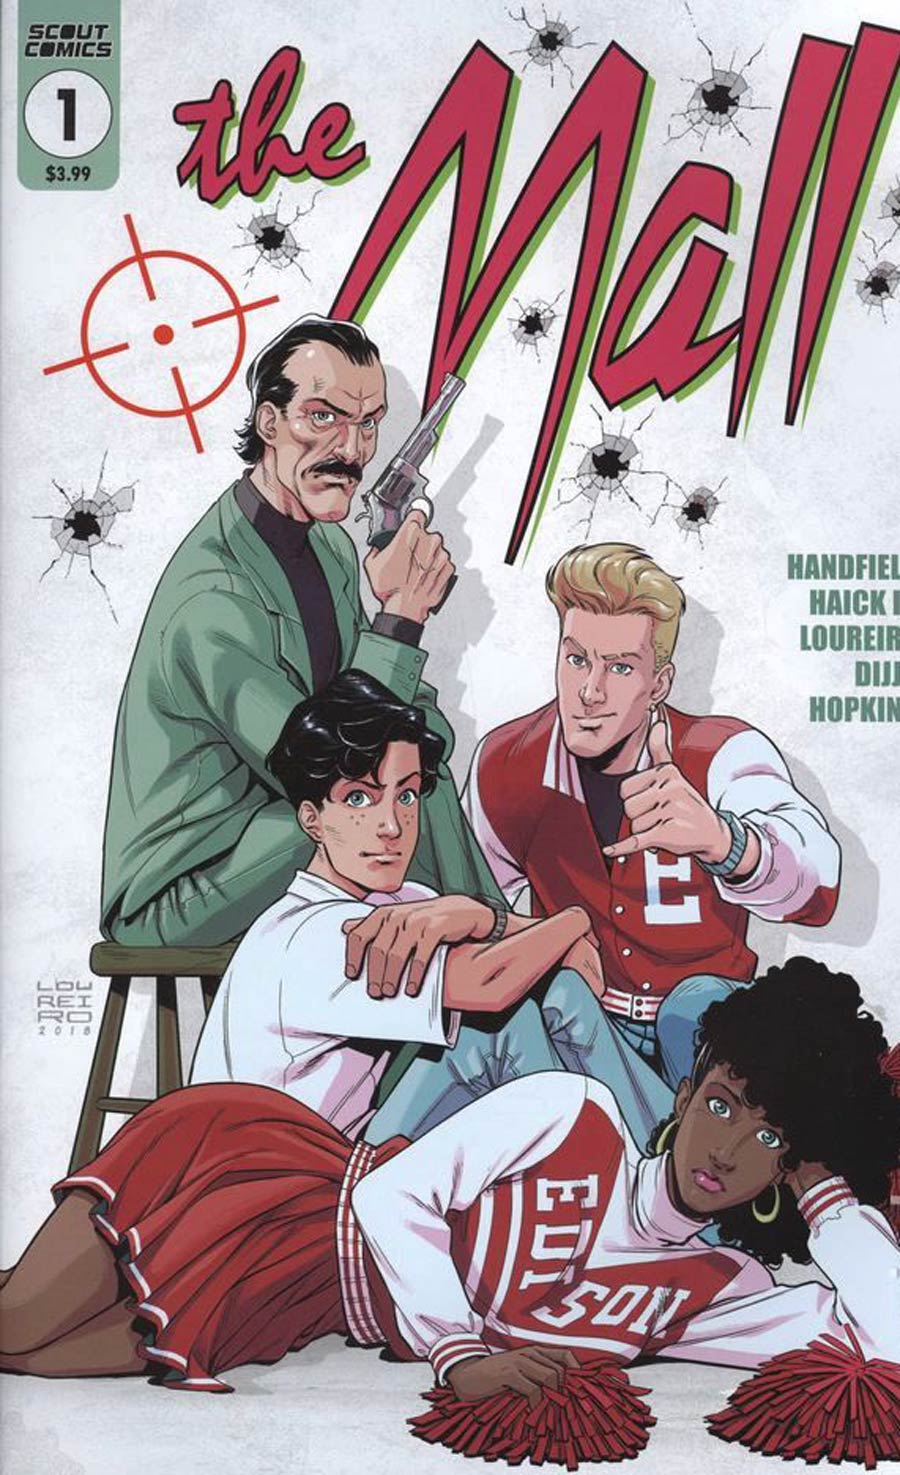 Mall (Scout Comics) #1 Cover A Regular Cover